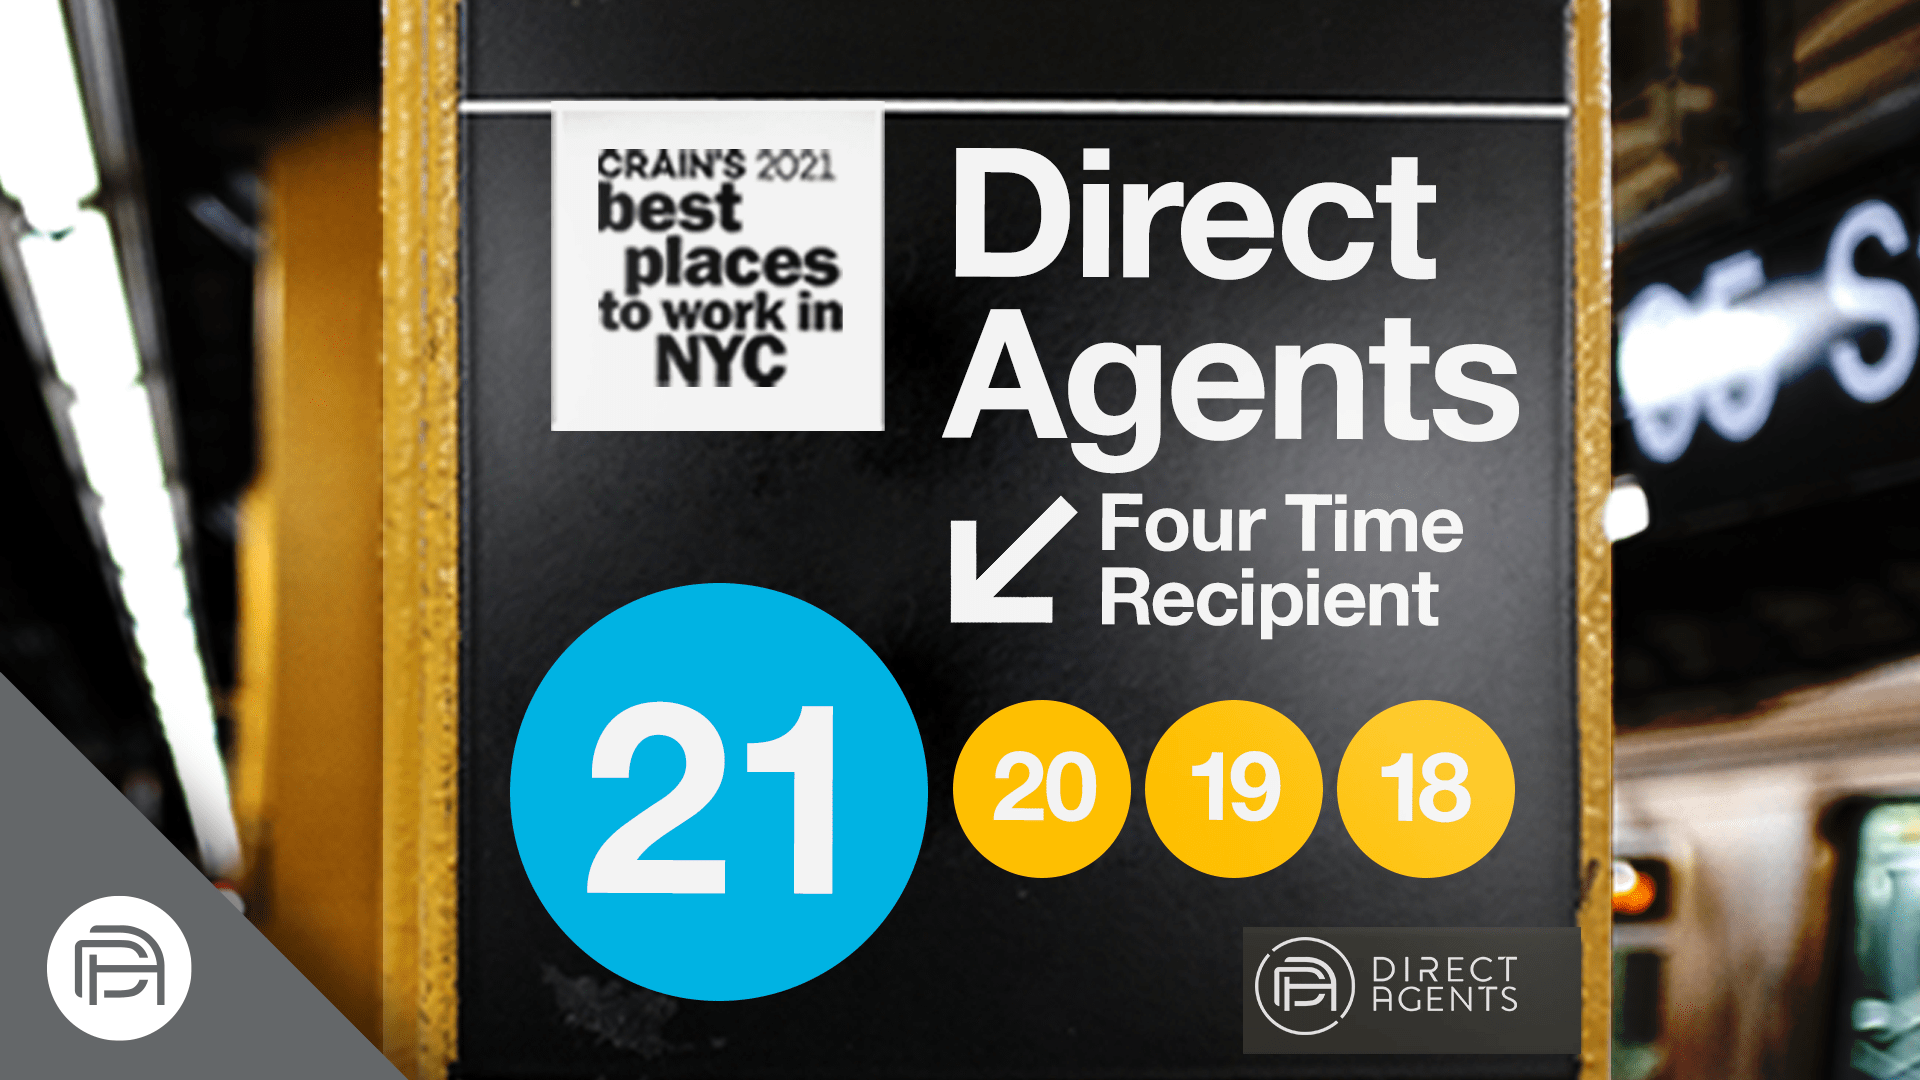 Direct Agents Wins Crain’s Best Place to Work 2021